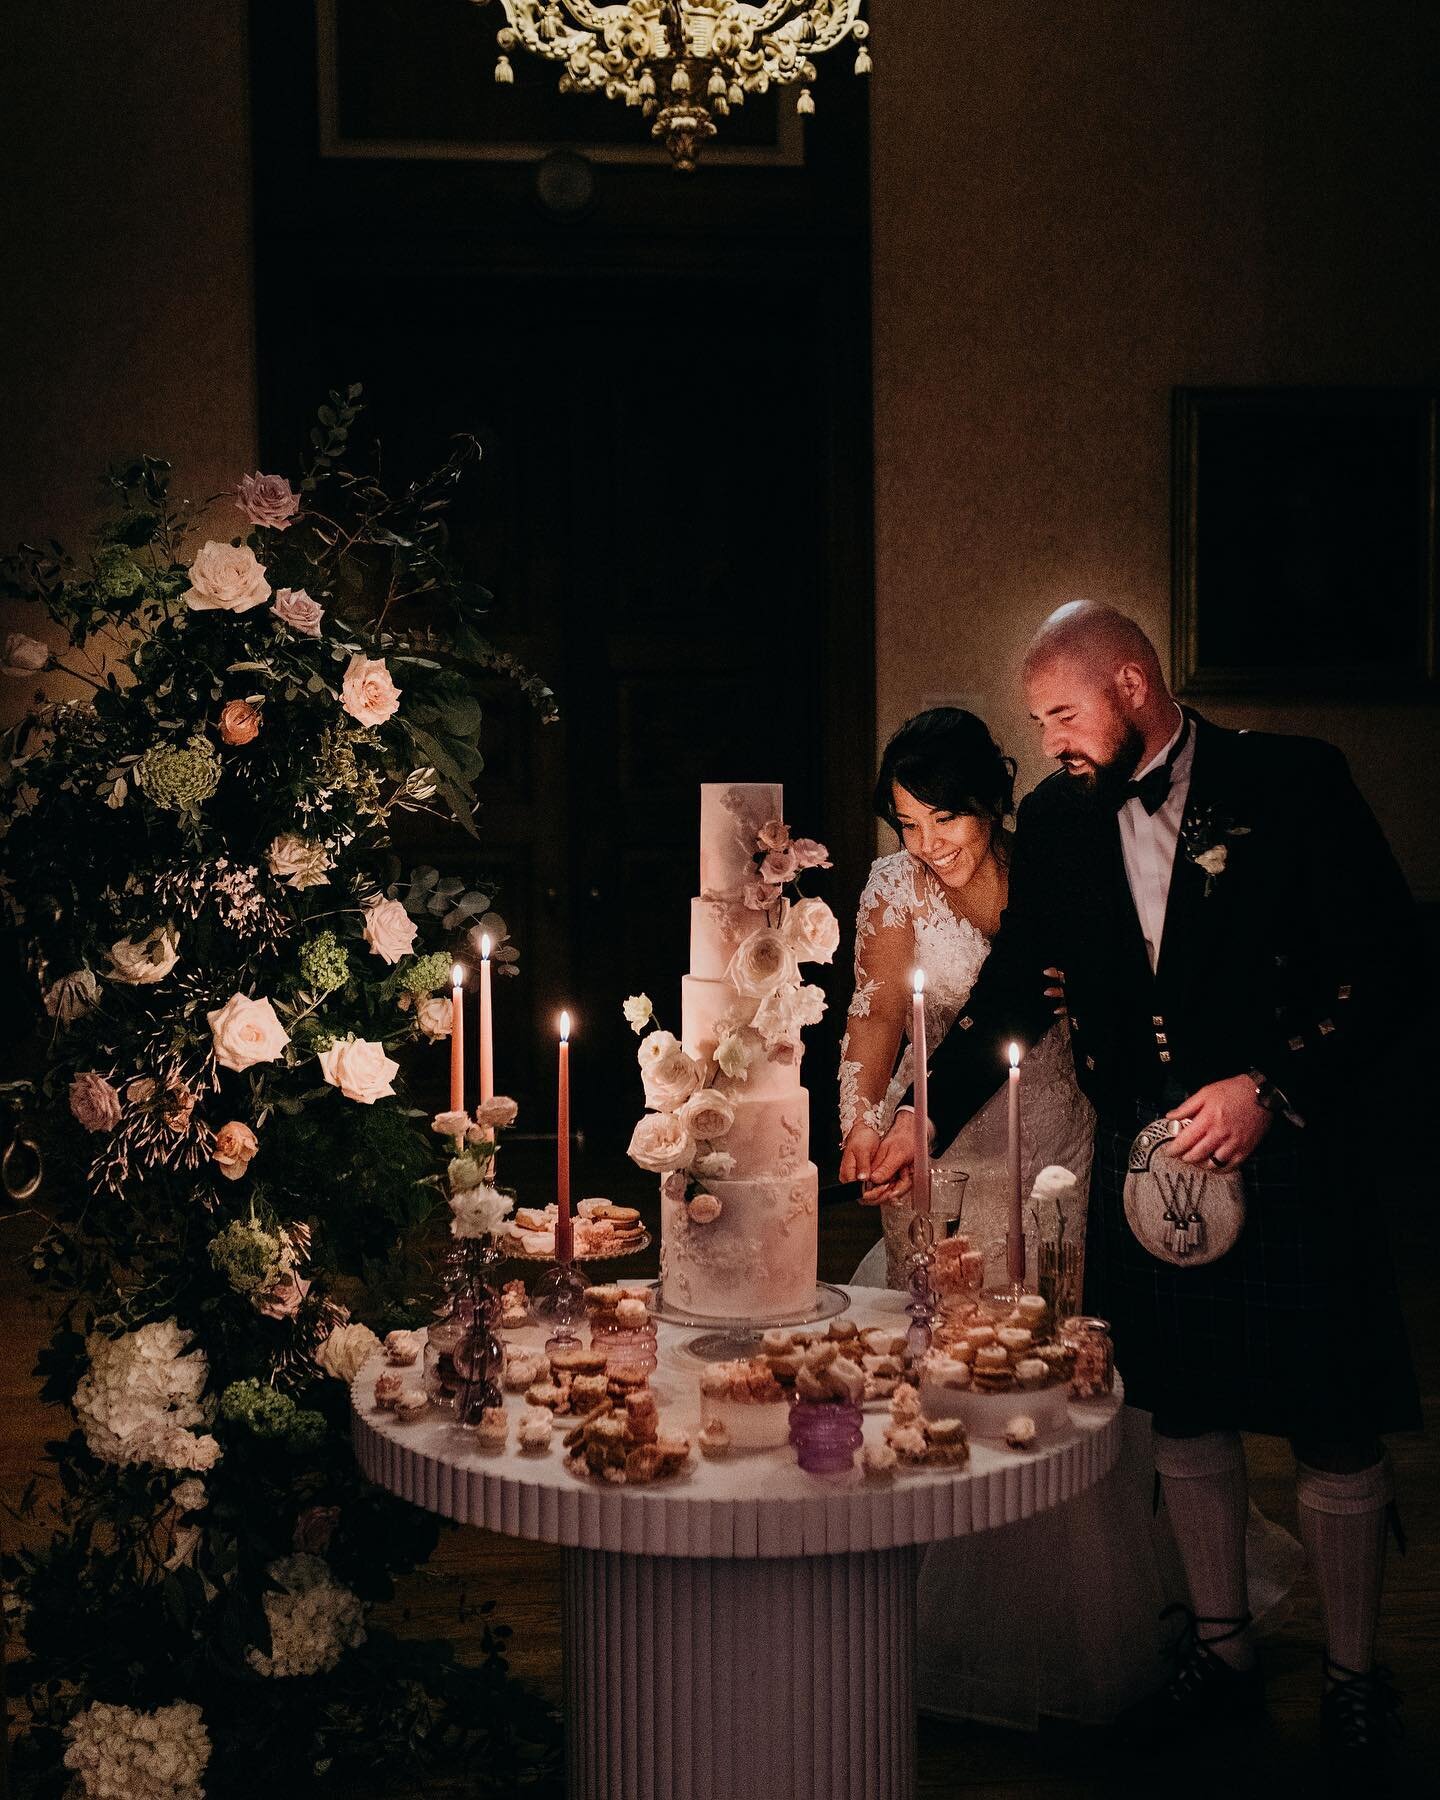 BRB, just going to plaster Lucia and Carl&rsquo;s photos all over my website because they are DREAMY 😍😍😍

Dream team
Photographer @dominikamiechowska_photography 
Venue @ashridgehouse 
Flowers @rebeccamarsalaweddings 
Table @thelittleweddingwareho